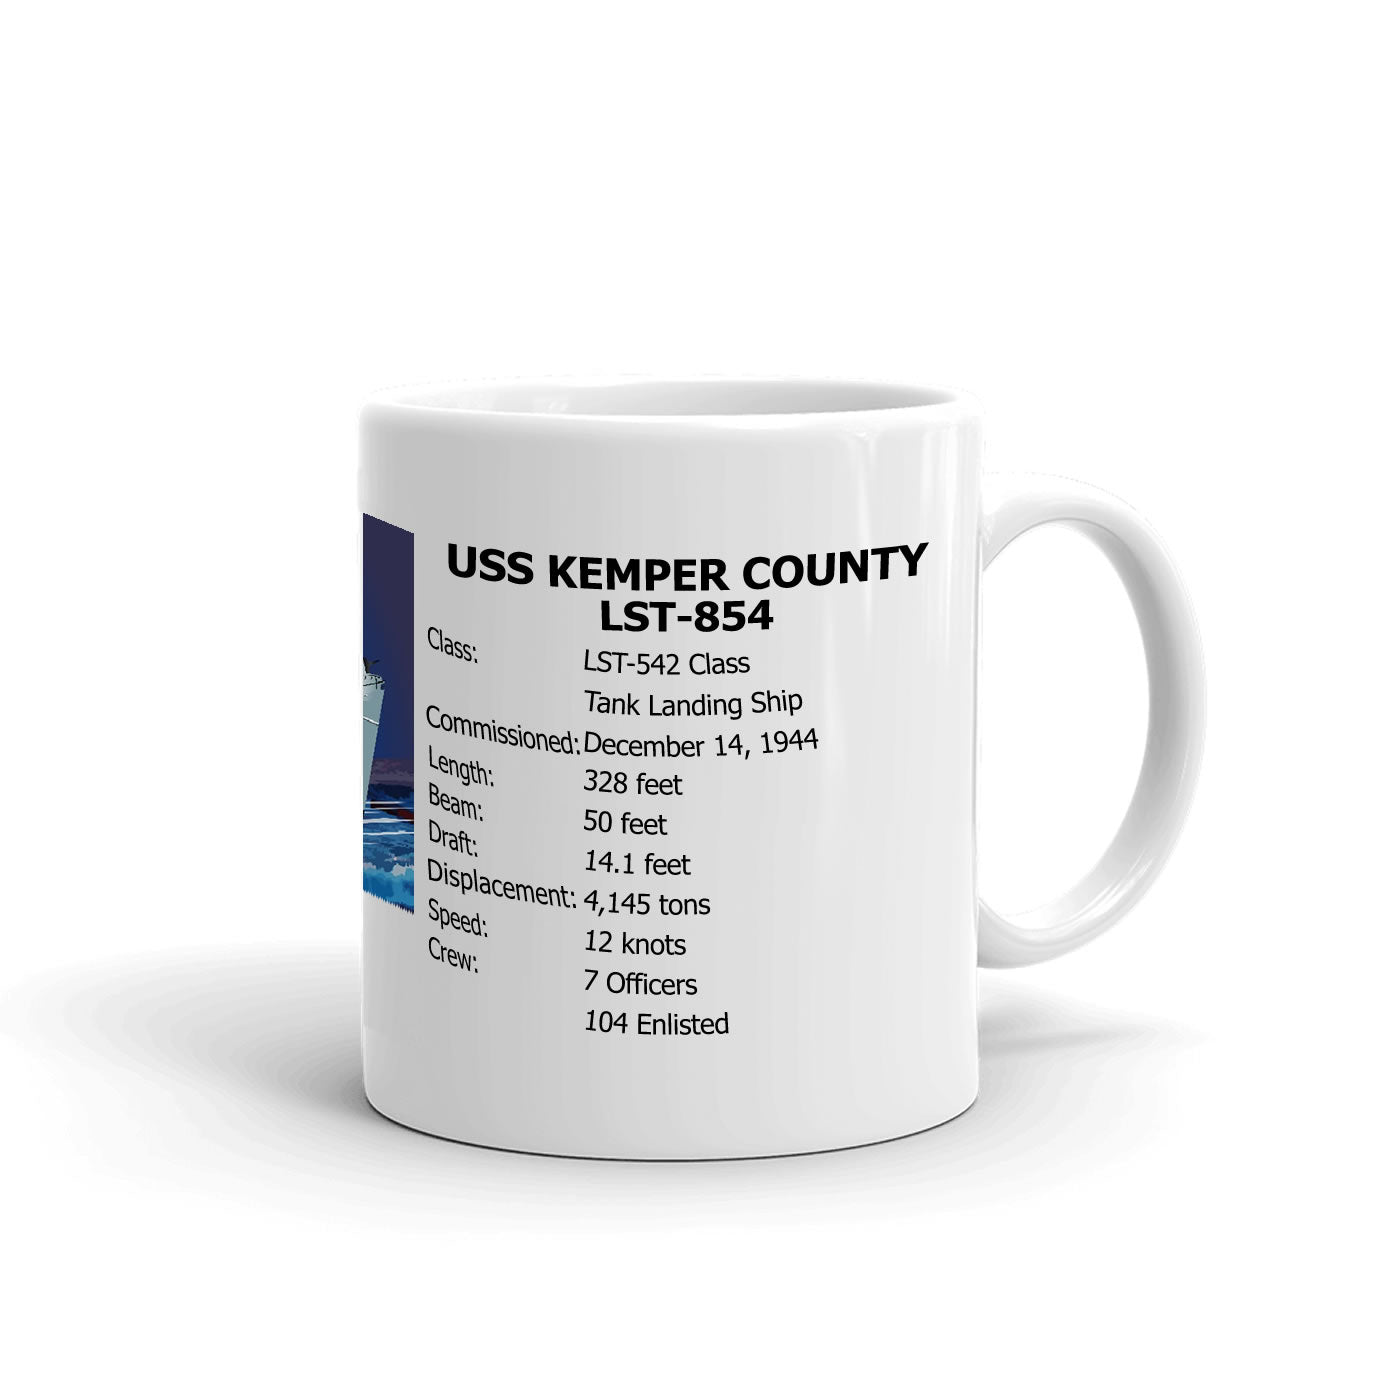 USS Kemper County LST-854 Coffee Cup Mug Right Handle